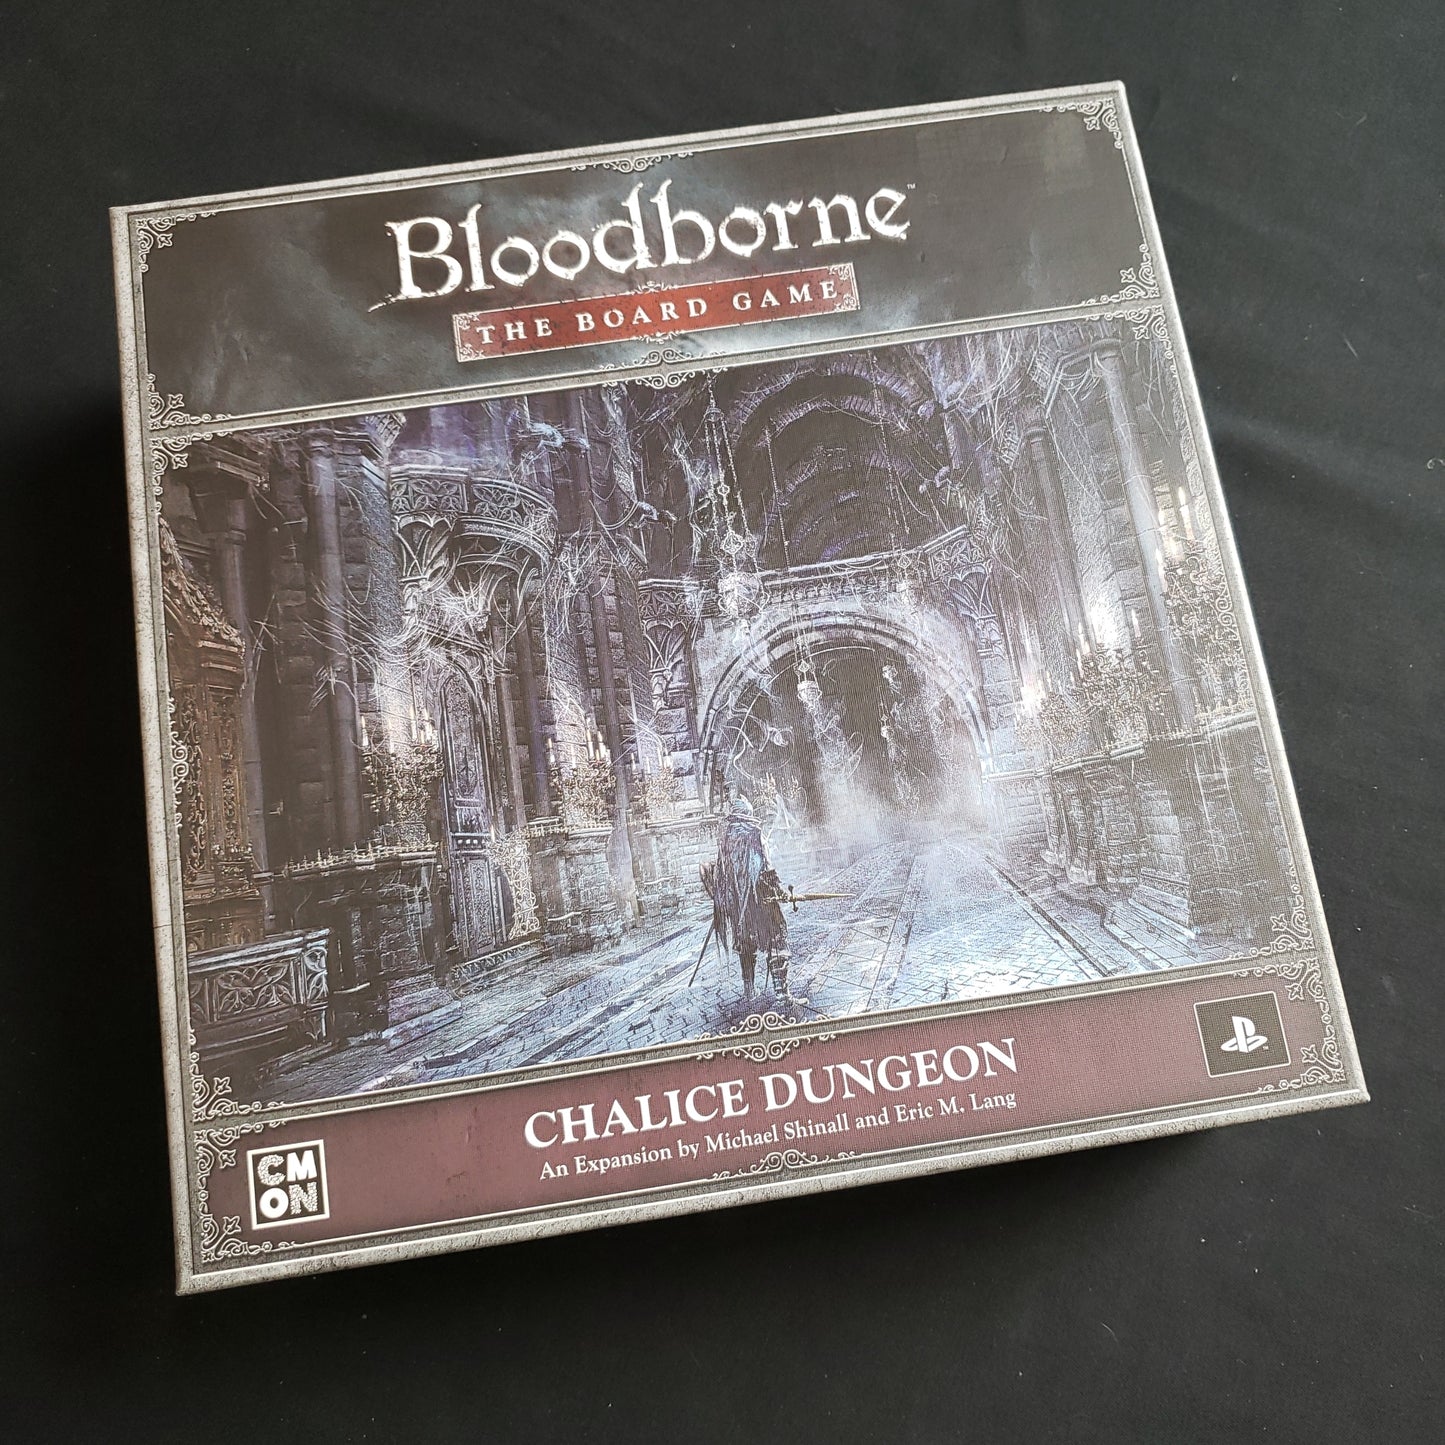 Image shows the front cover of the box of the Chalice Dungeon expansion for Bloodborne: The Board Game